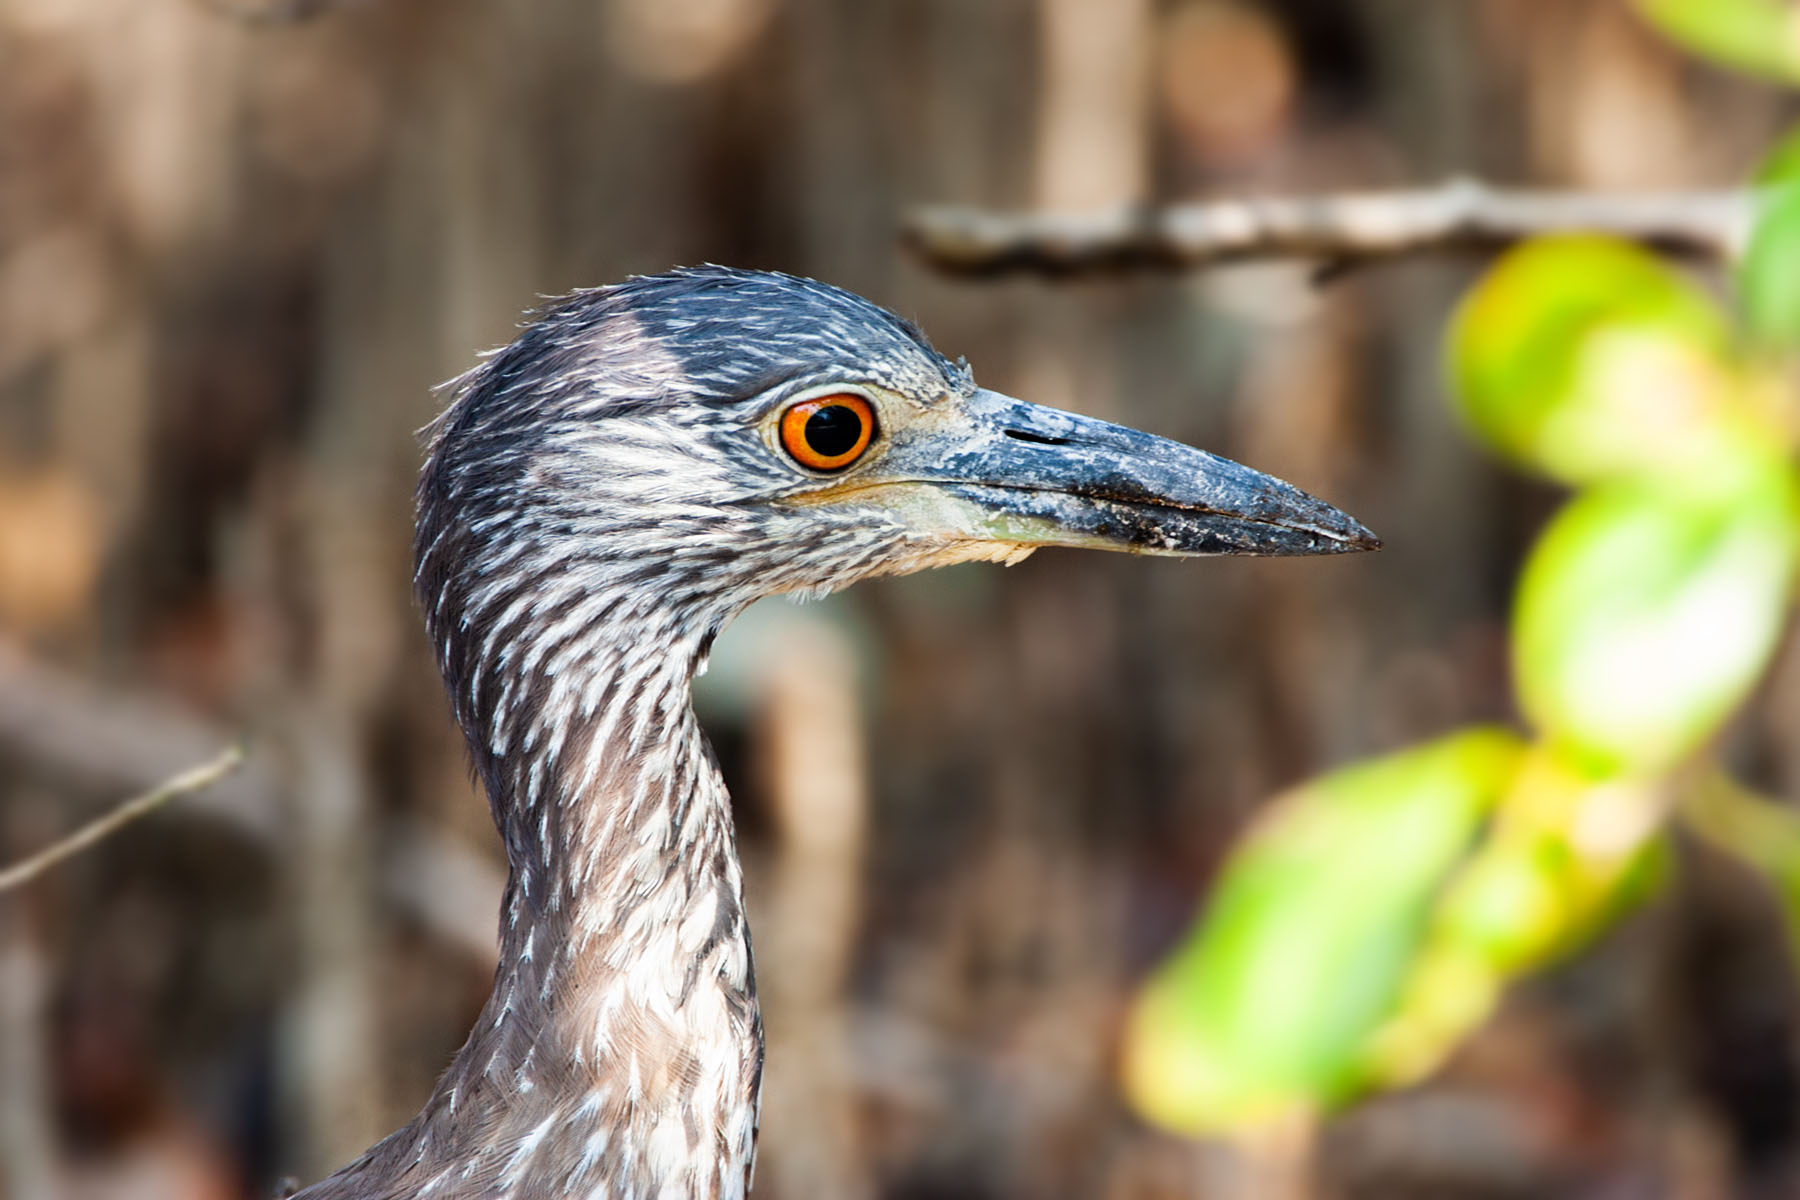 Yellow-crowned night heron similar to one I saw in 2002 at Sanibel, Honeymoon Island, Florida.  Click for next photo.